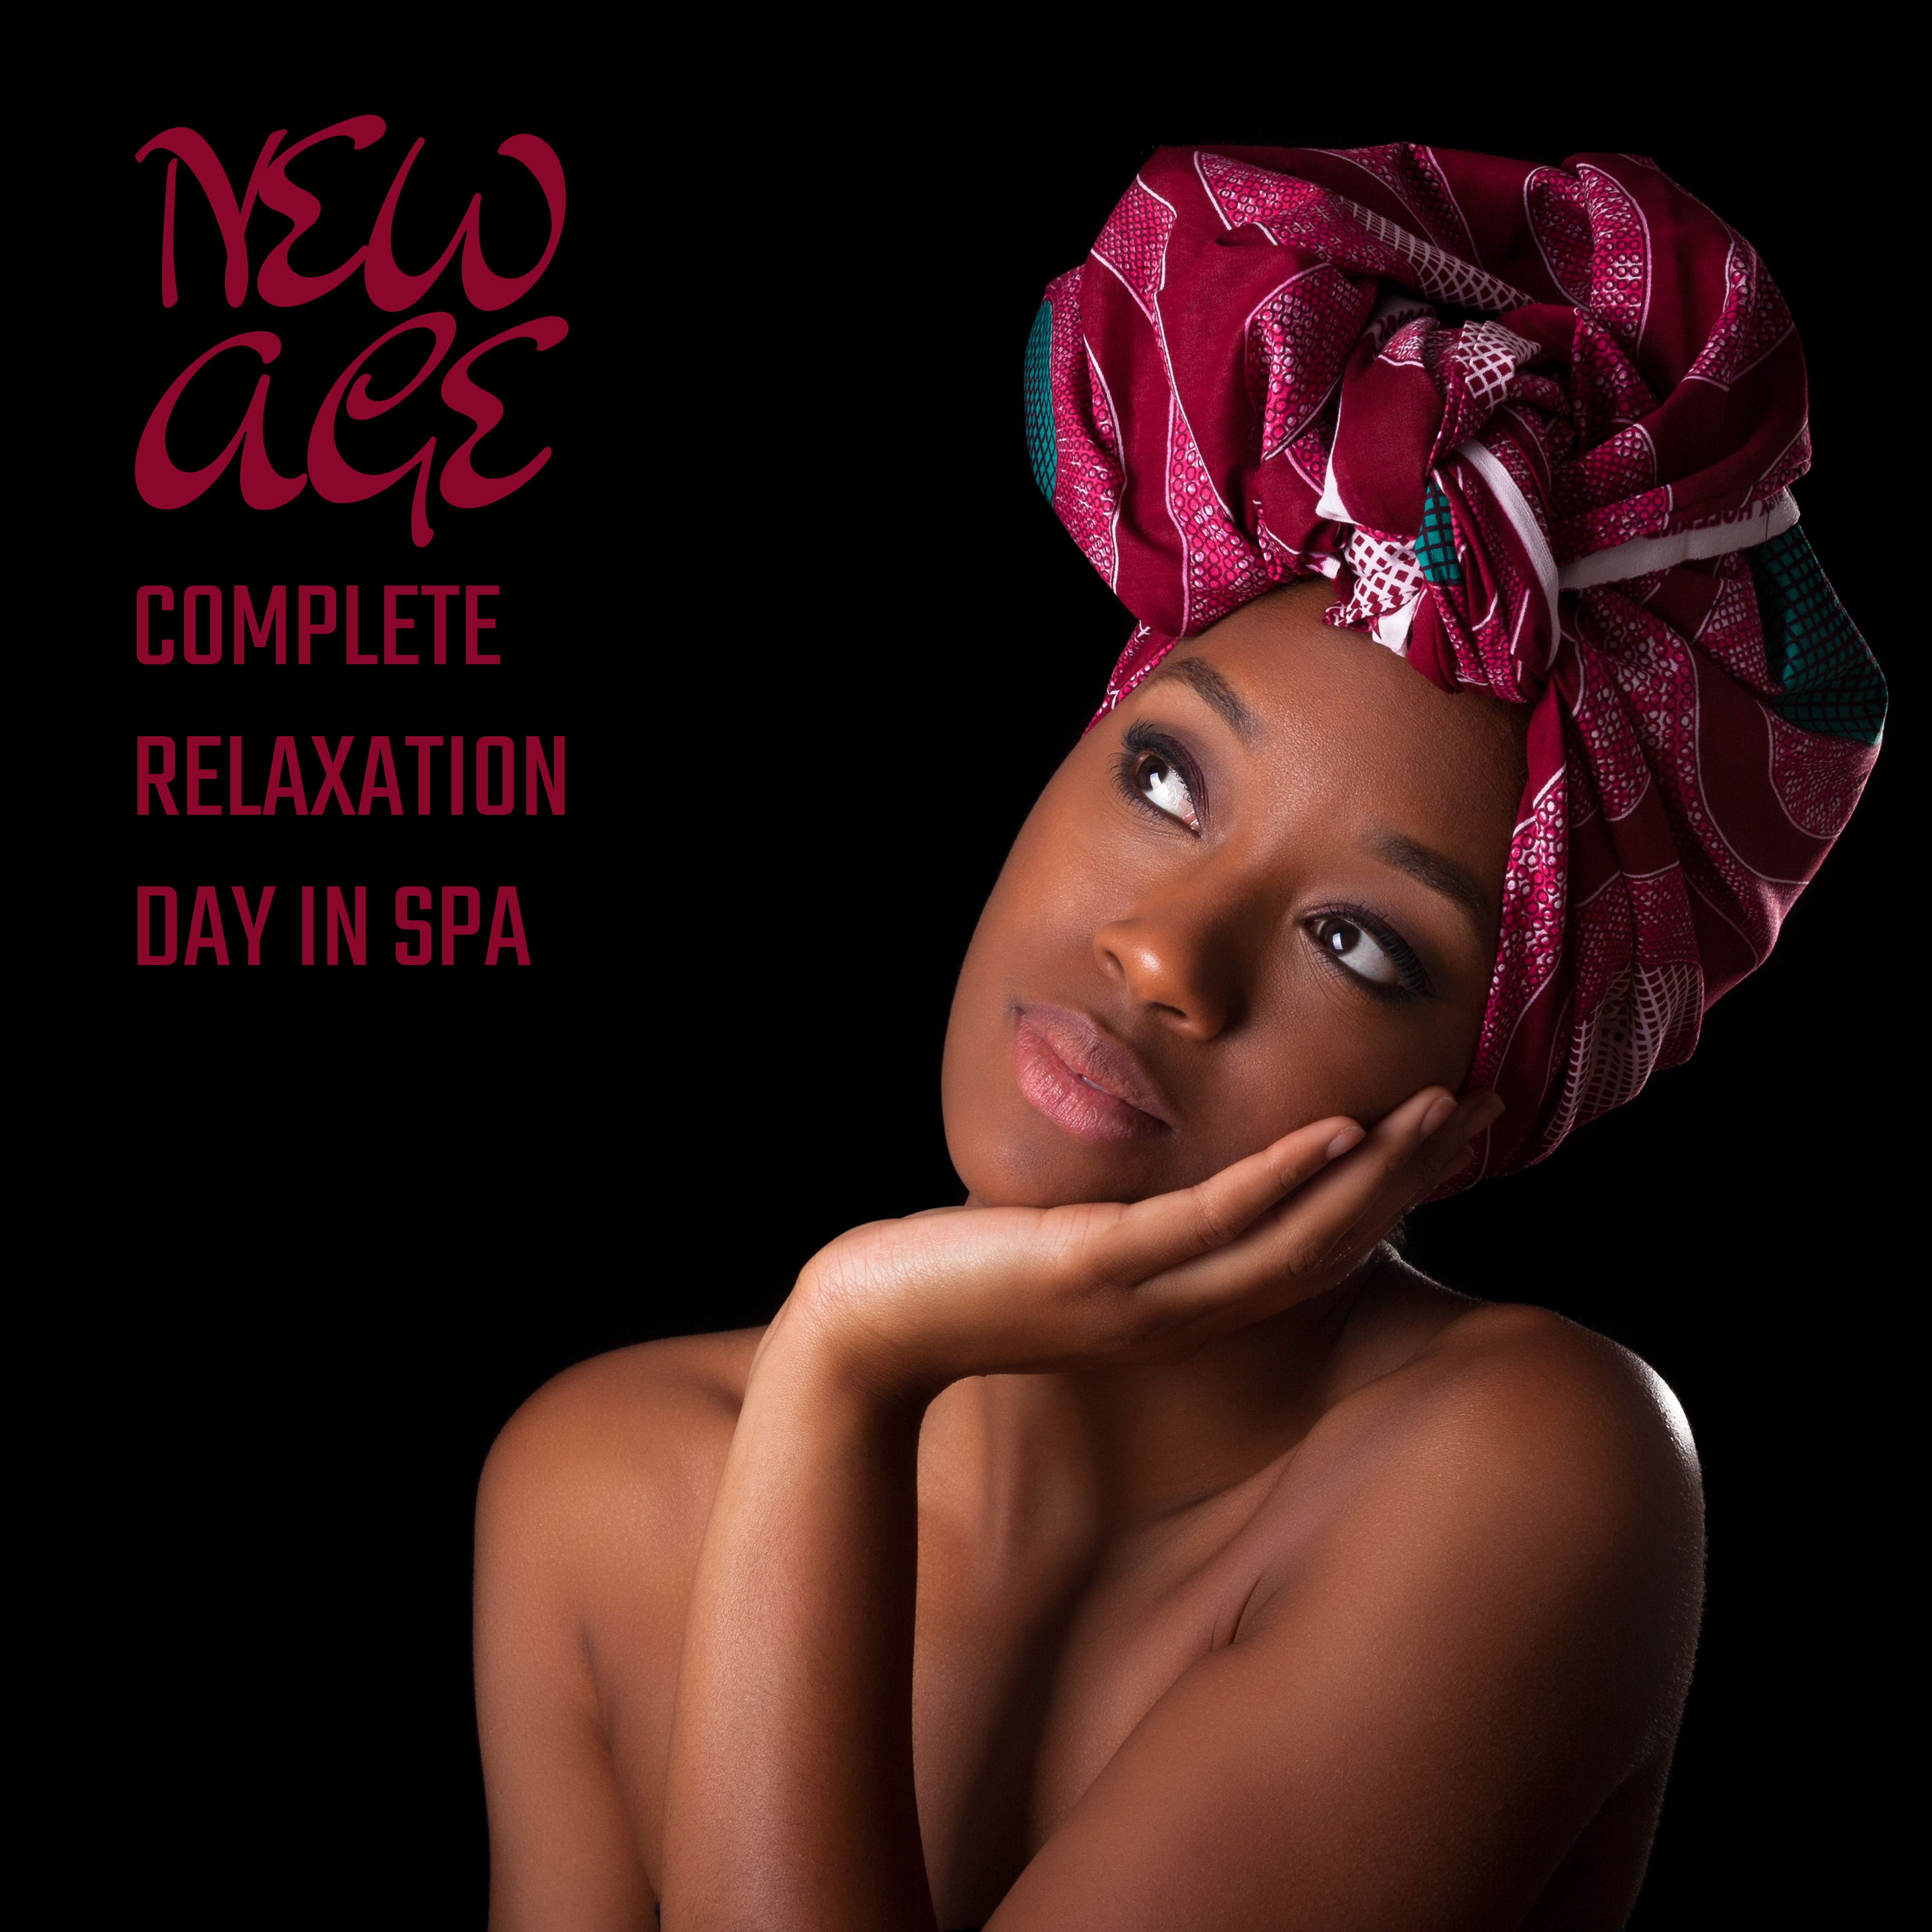 New Age Complete Relaxation Day in Spa